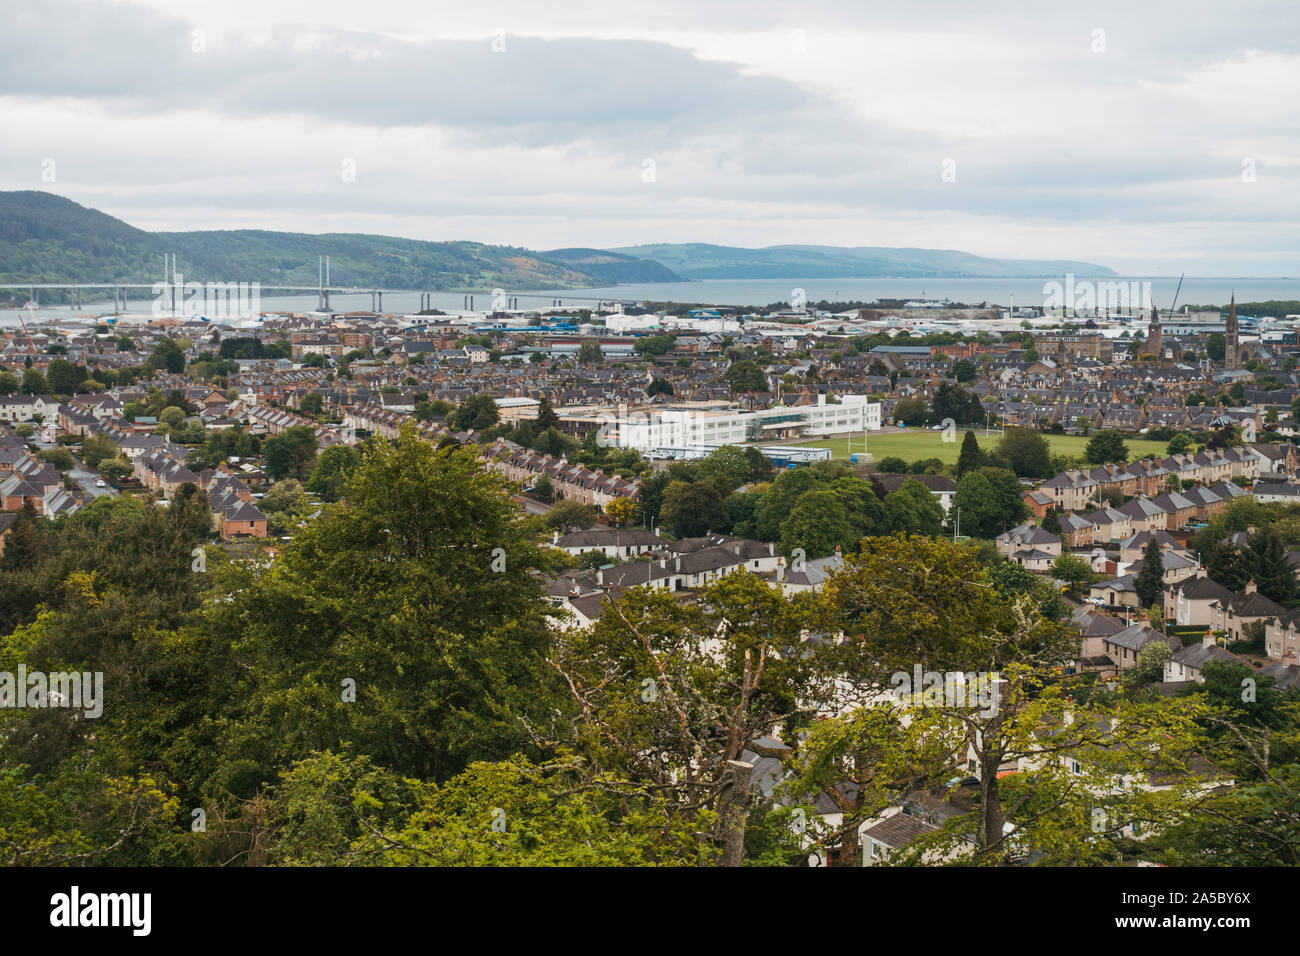 Looking out over the city of Inverness on a cloudy day from on top of Tomnahurich Cemetery Hill Stock Photo